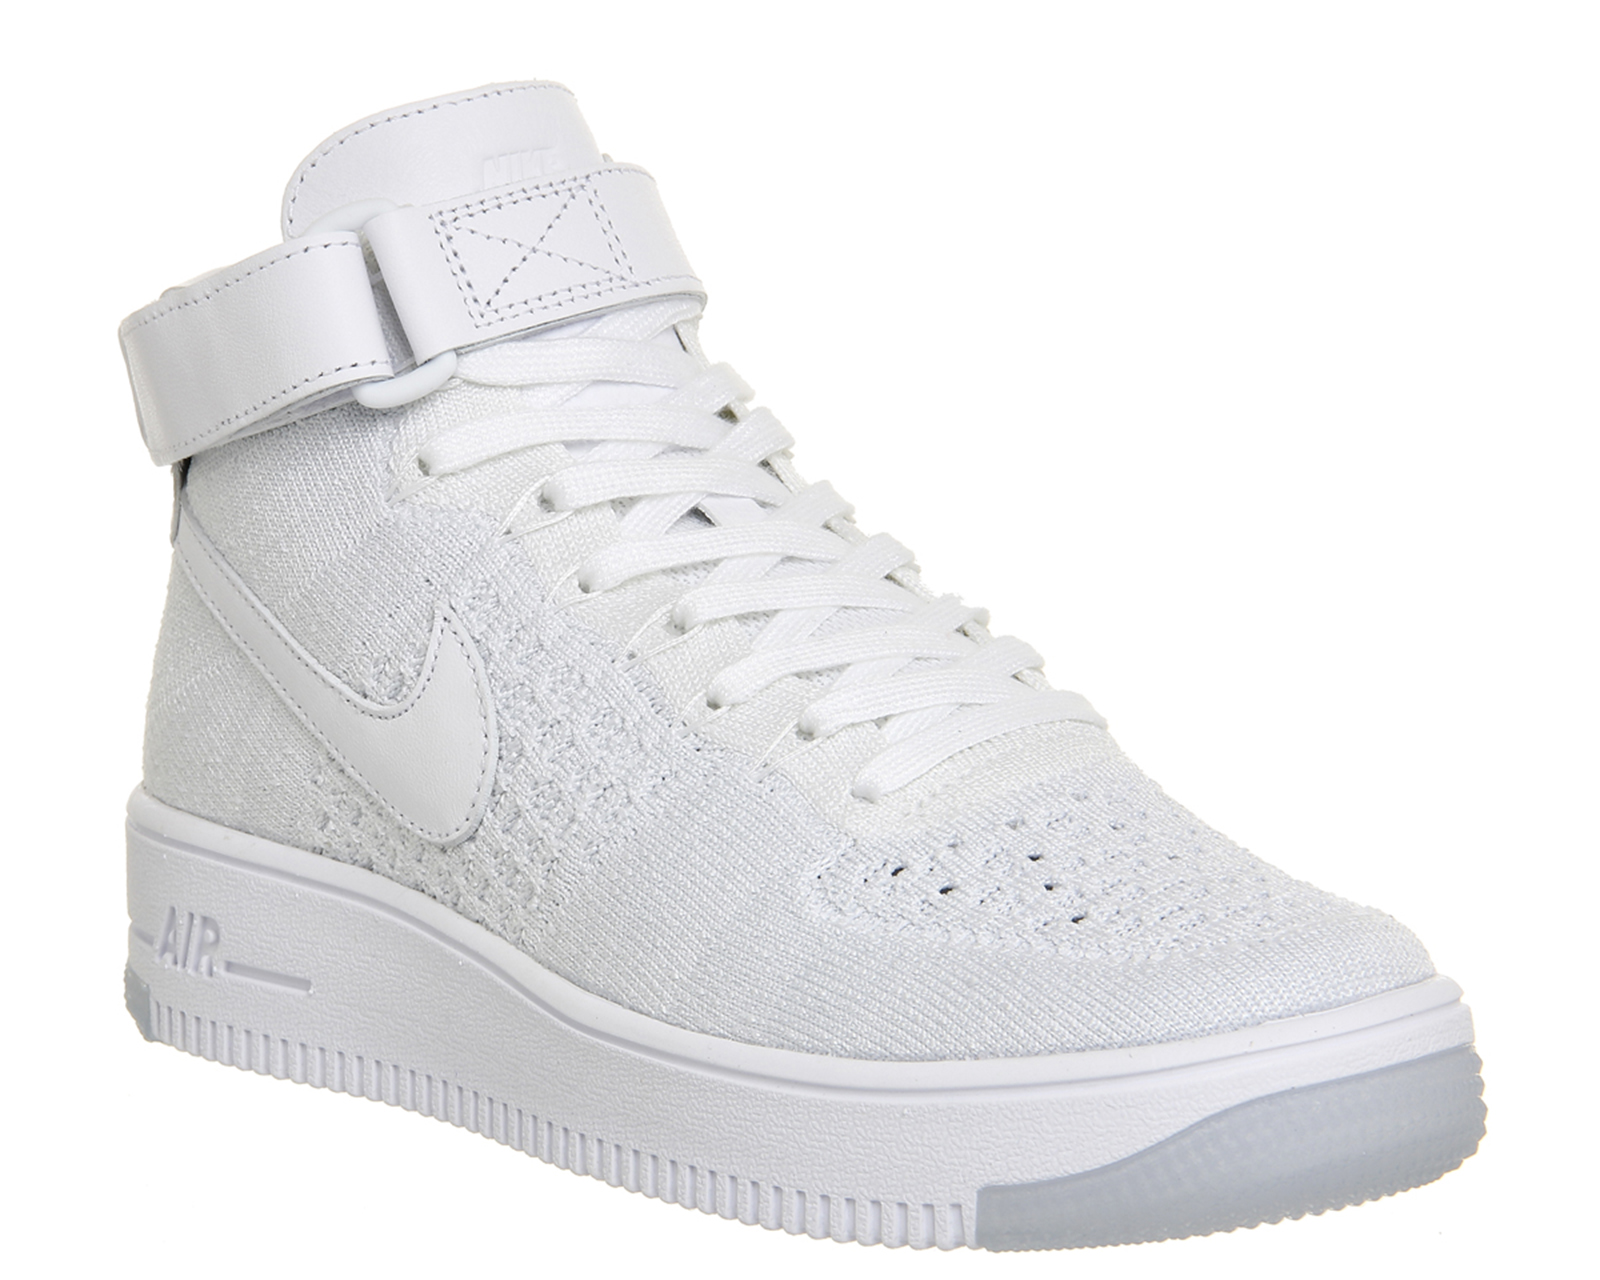 air force 1 mid flyknit oreo white